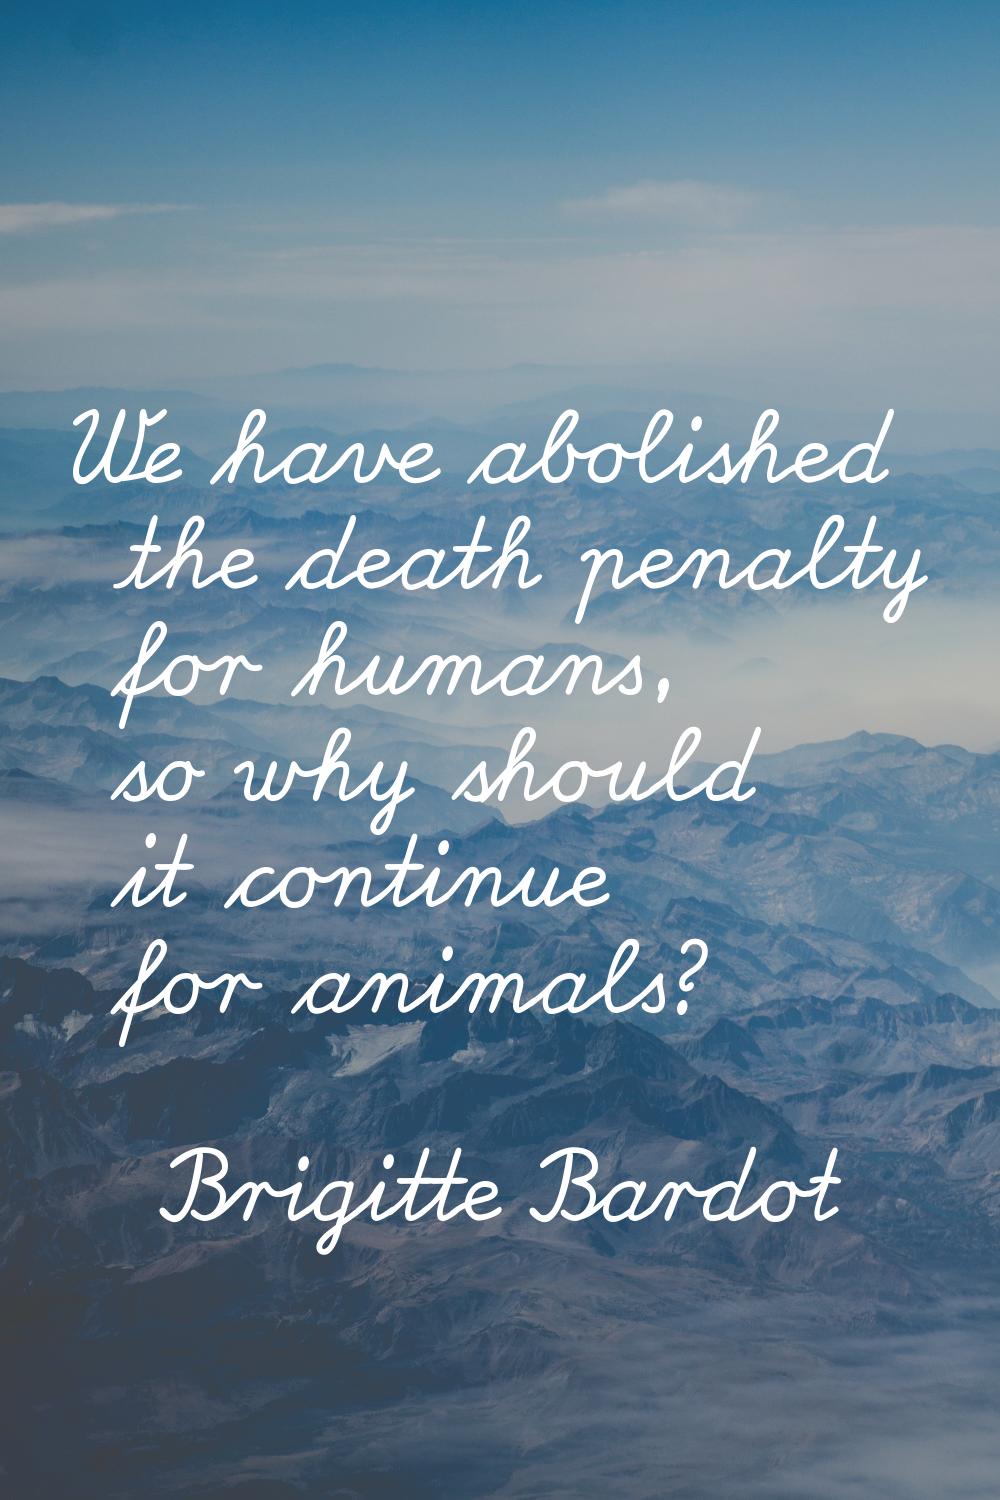 We have abolished the death penalty for humans, so why should it continue for animals?